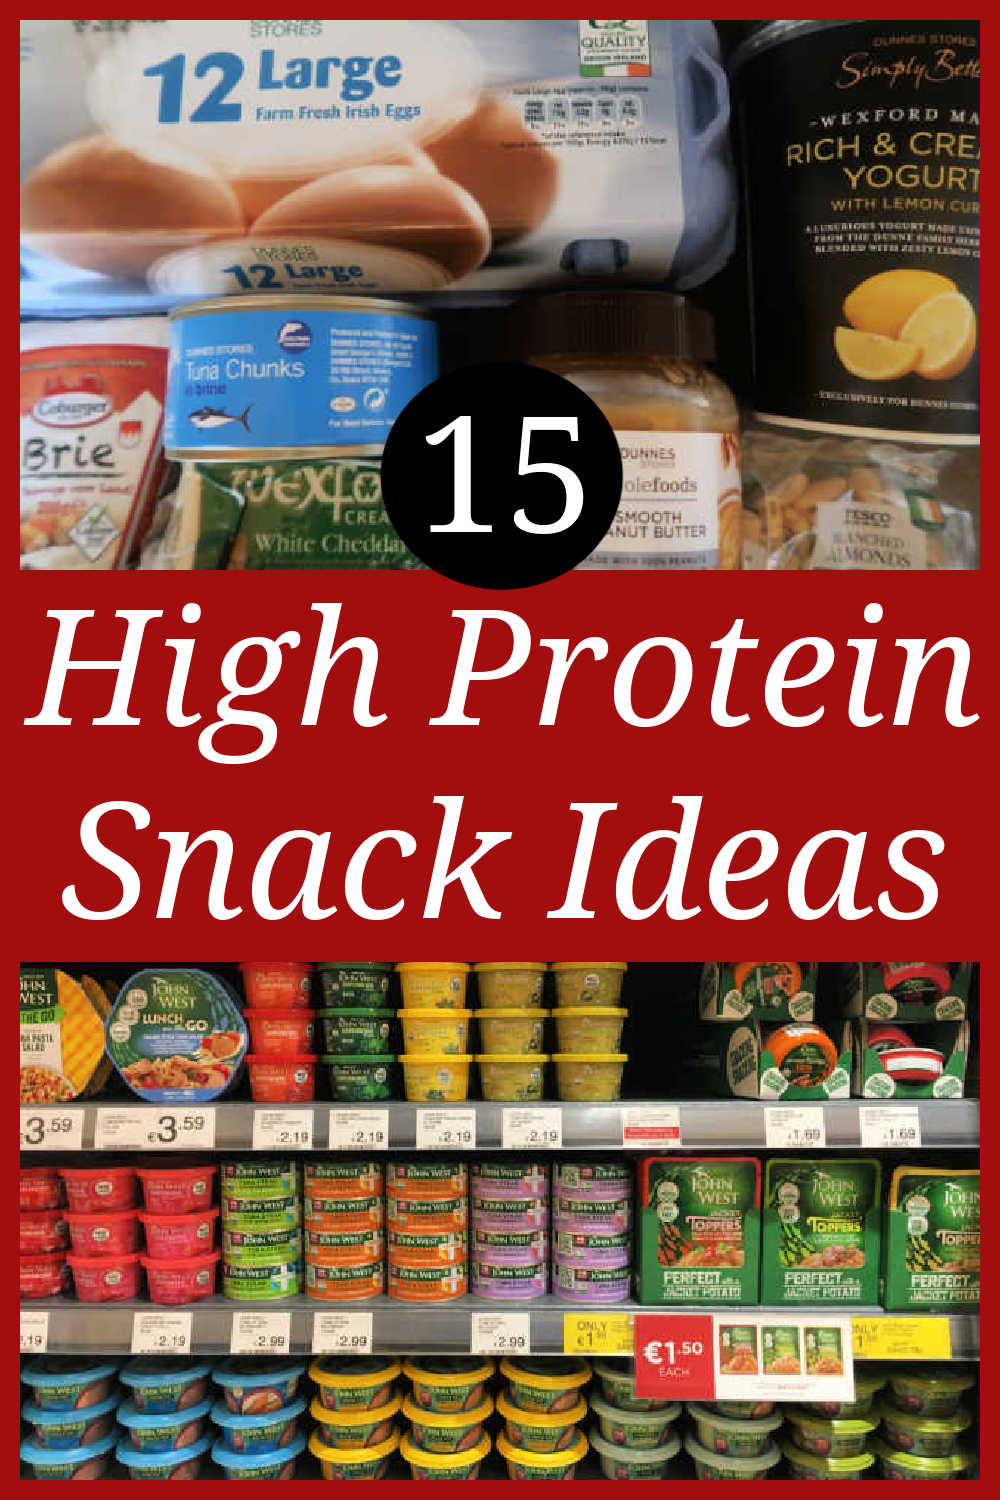 15 High Protein Snack Ideas - The best easy healthy snacks you can snack on that are portable to take on the go to help keep you full between meals - plus video snacks haul. 